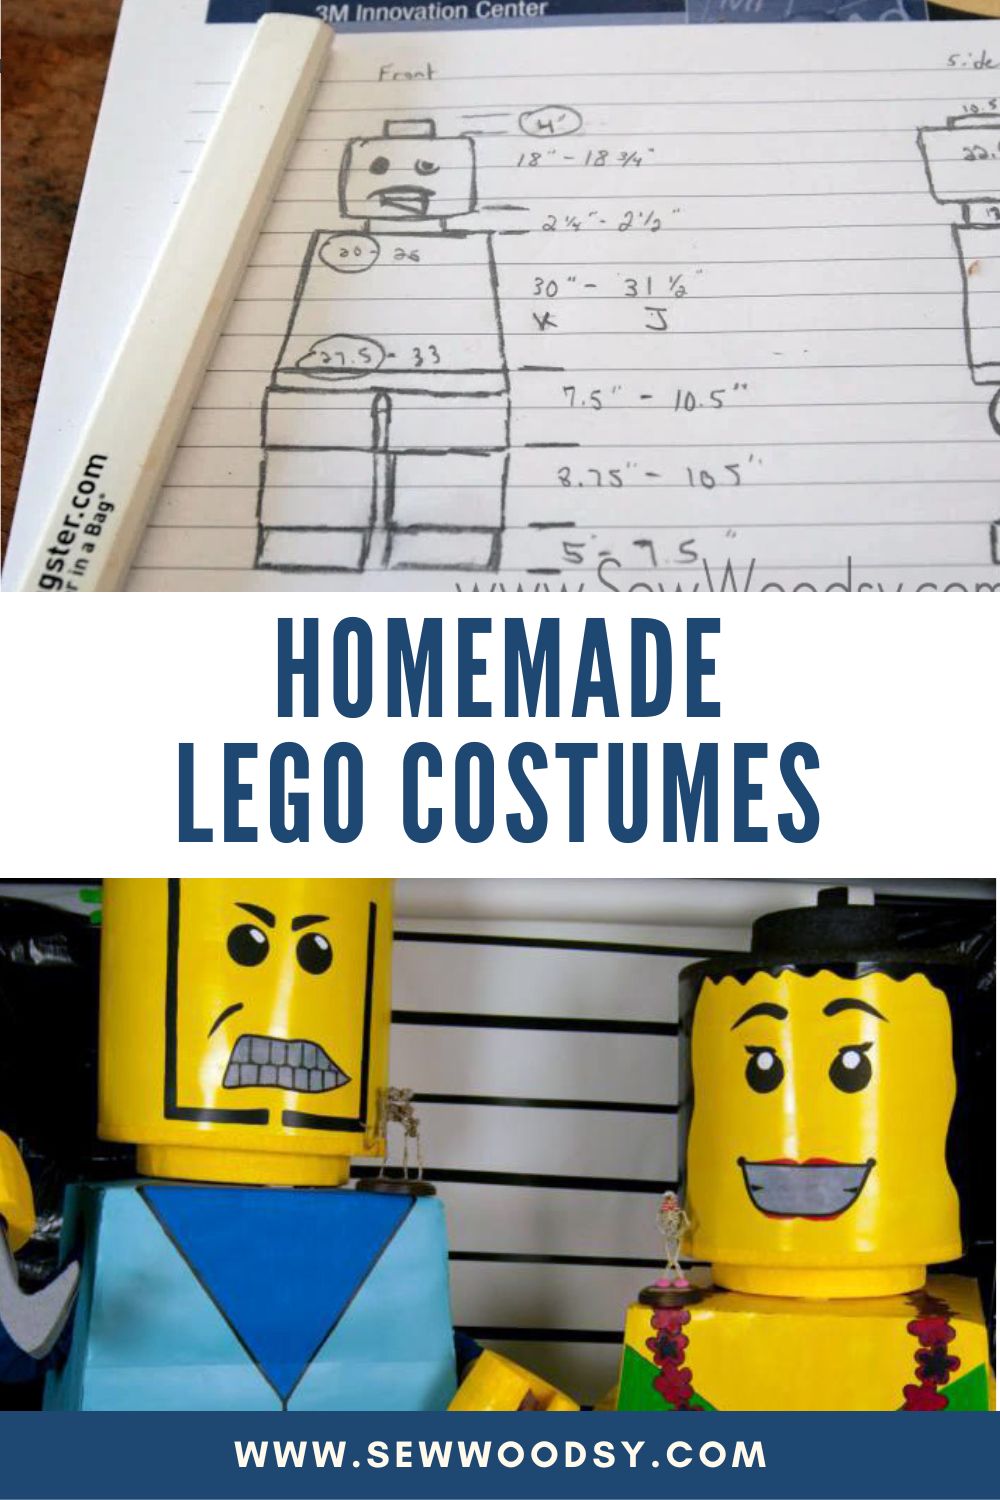 drawing of a lego figure divided by text on image for Pinterest with two man and female legos on the bottom.